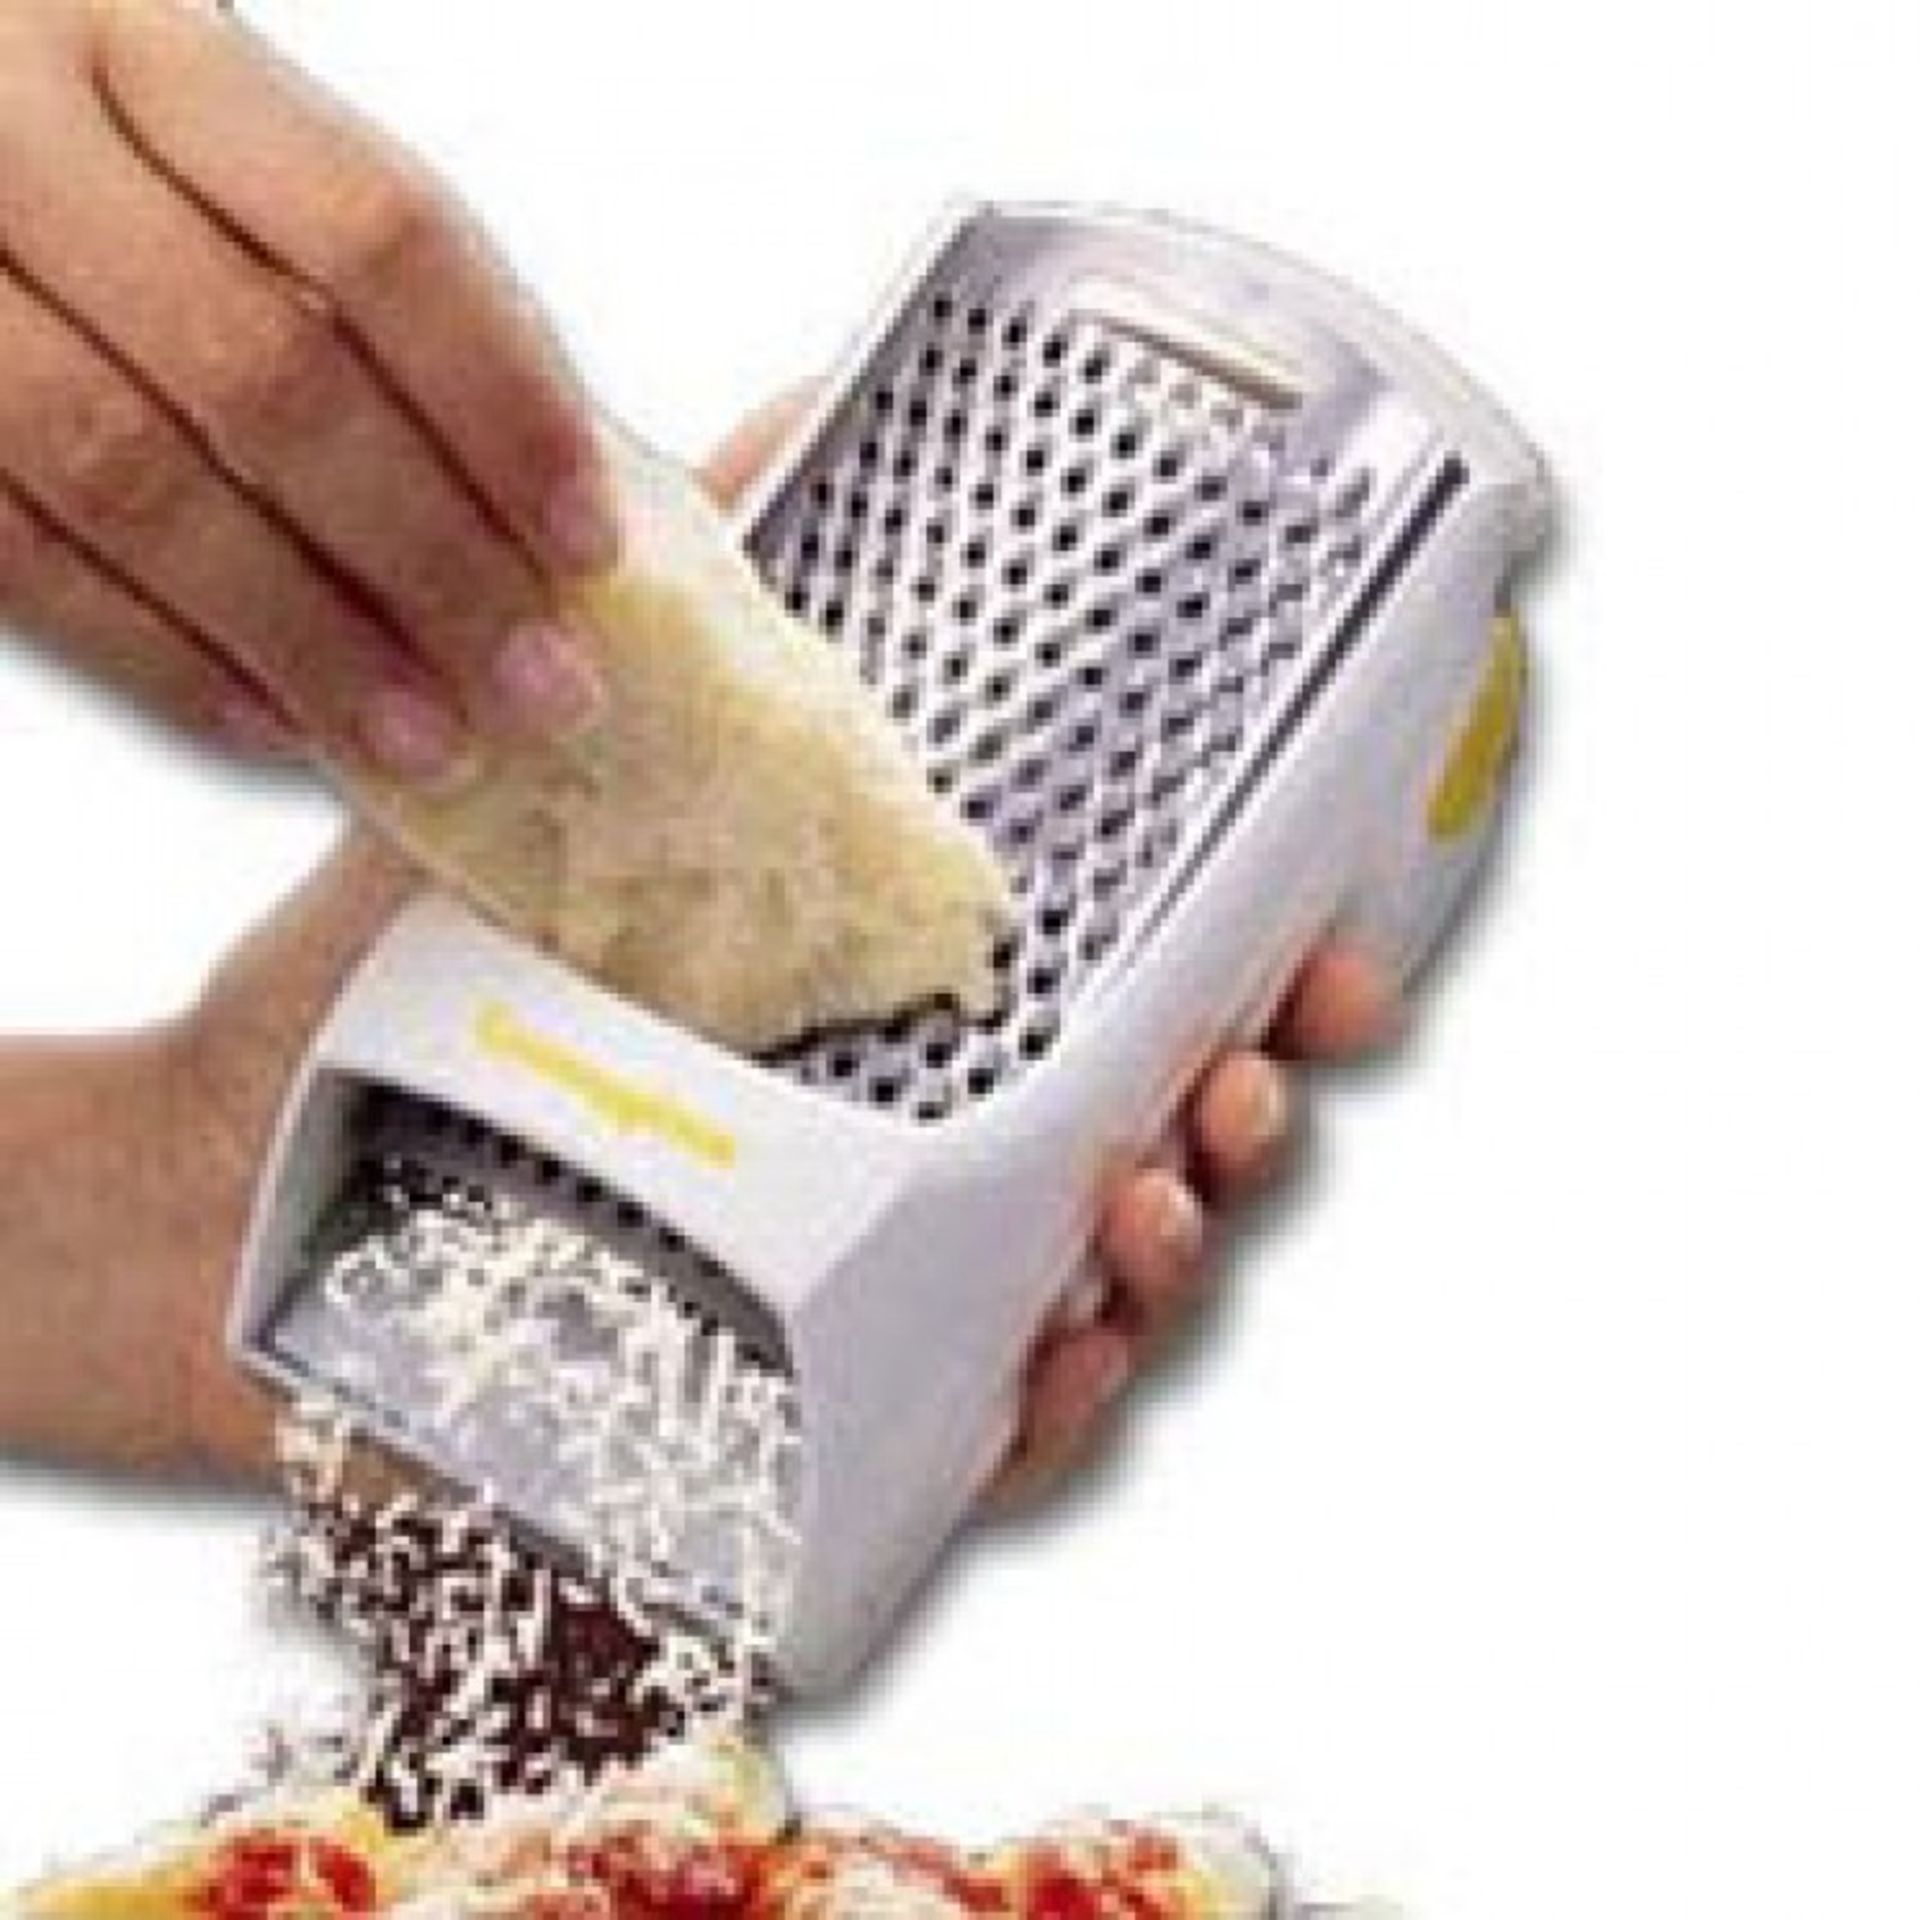 V Grade A Termozeta Rechargeable Cheese Grater-Stainless Steel Blade-Easy Clean-Size 18.5 X 8.5 X